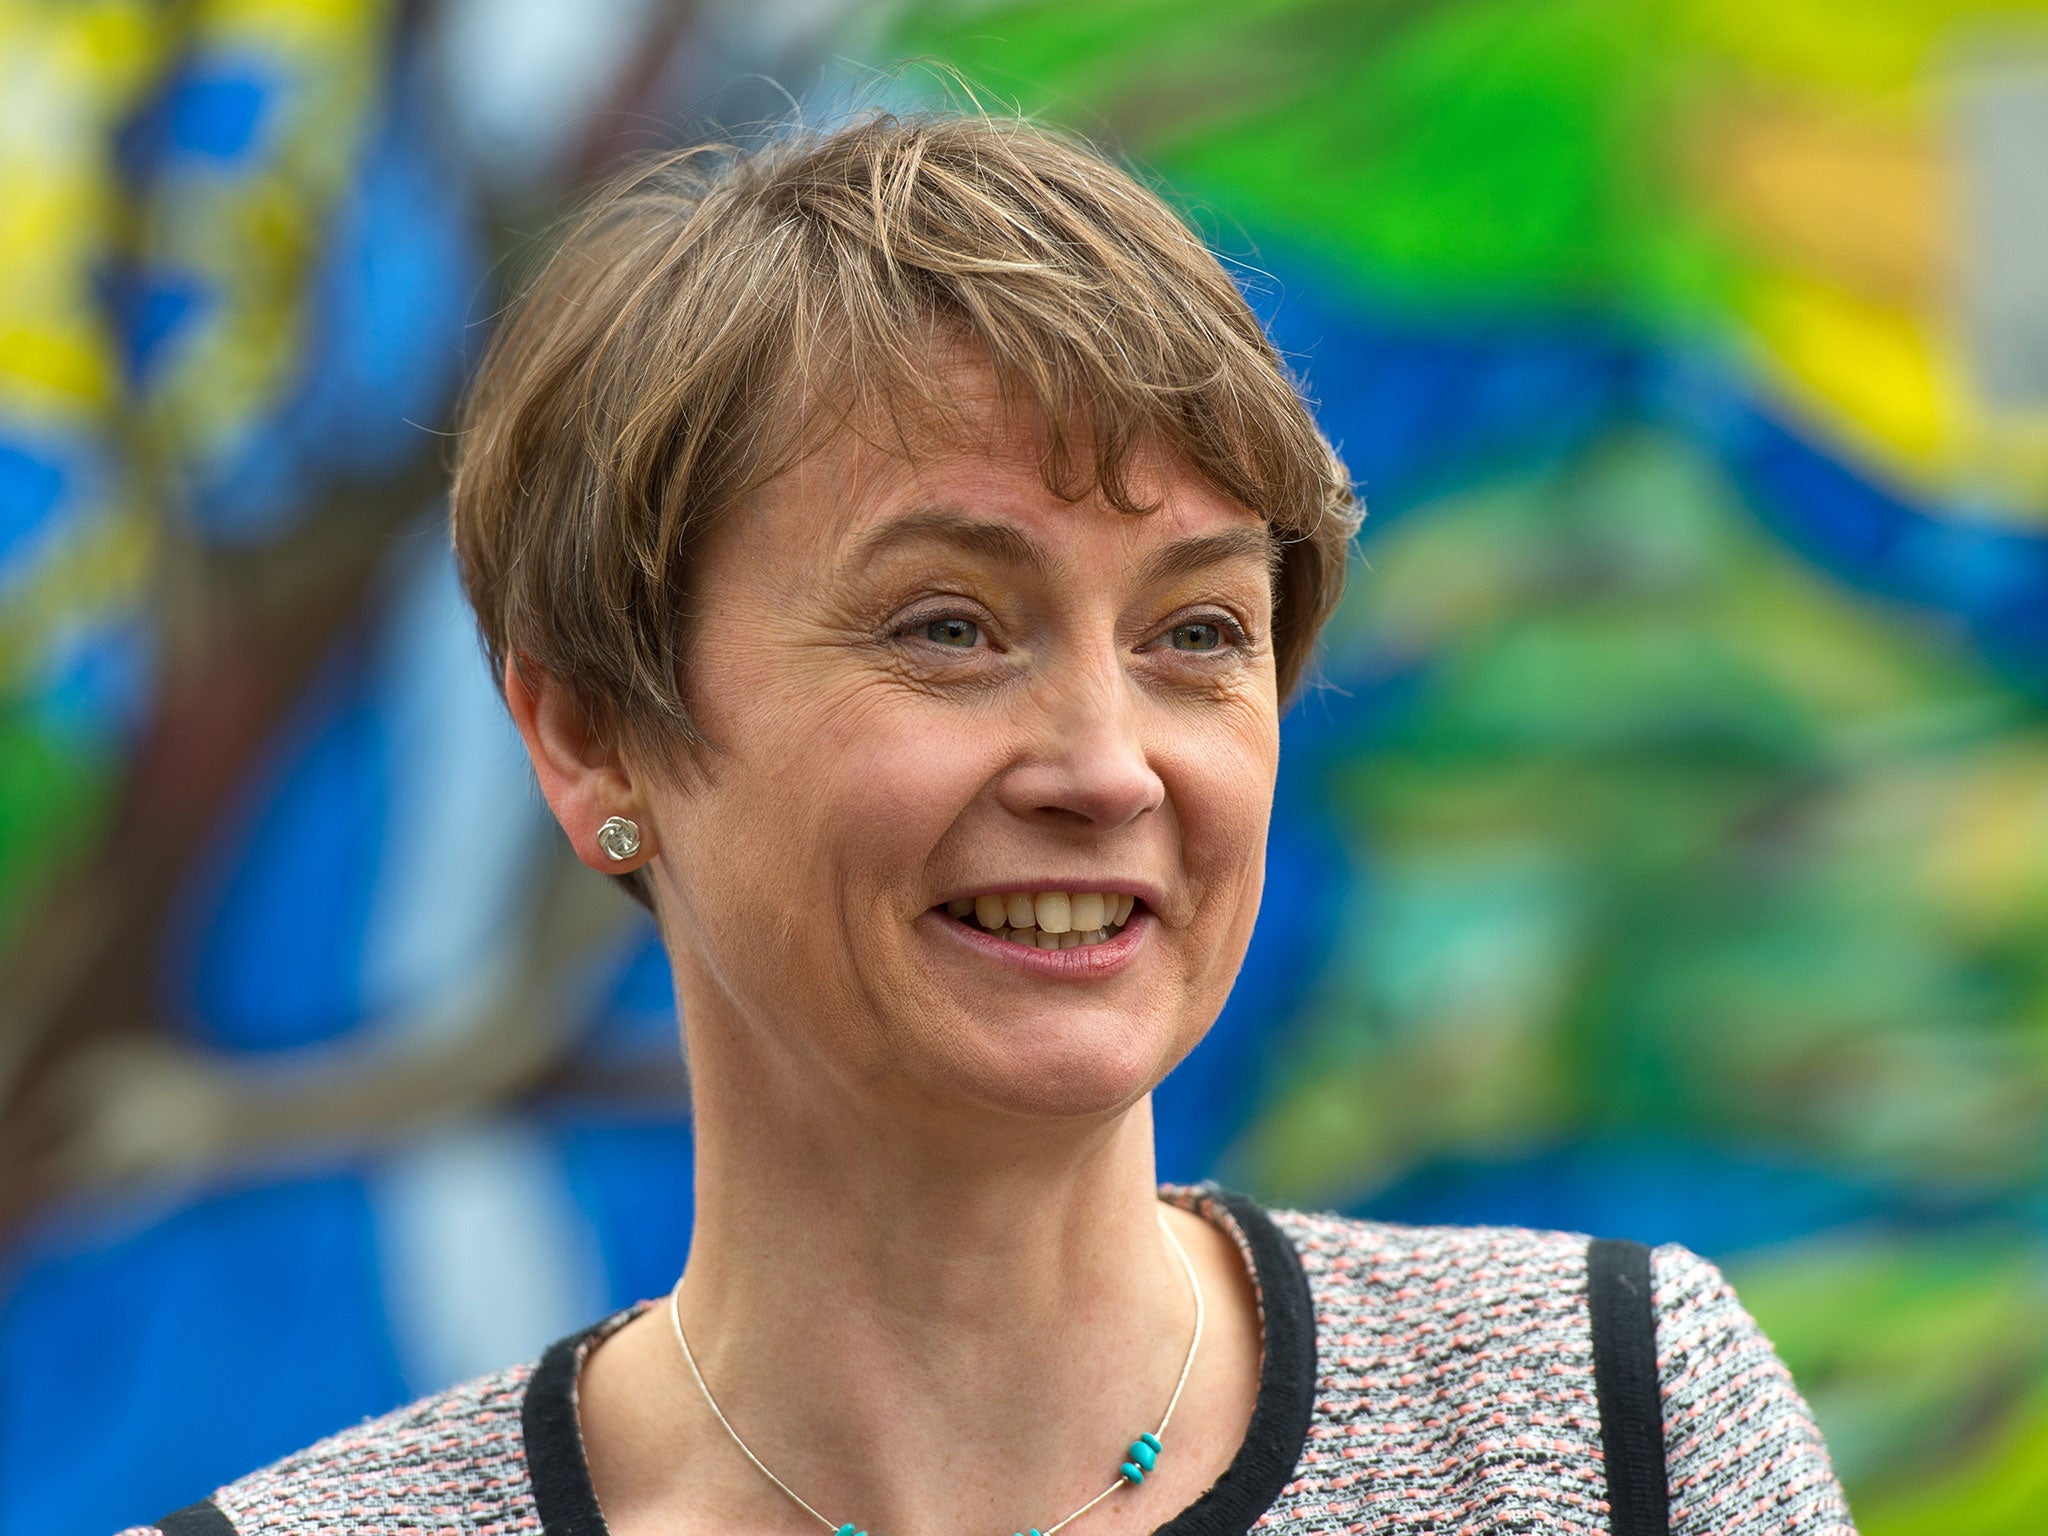 Labour must reach out to a generation of families who struggle to work and bring up children, with an offer of a free, Scandinavian-style system of universal childcare, Yvette Cooper has said